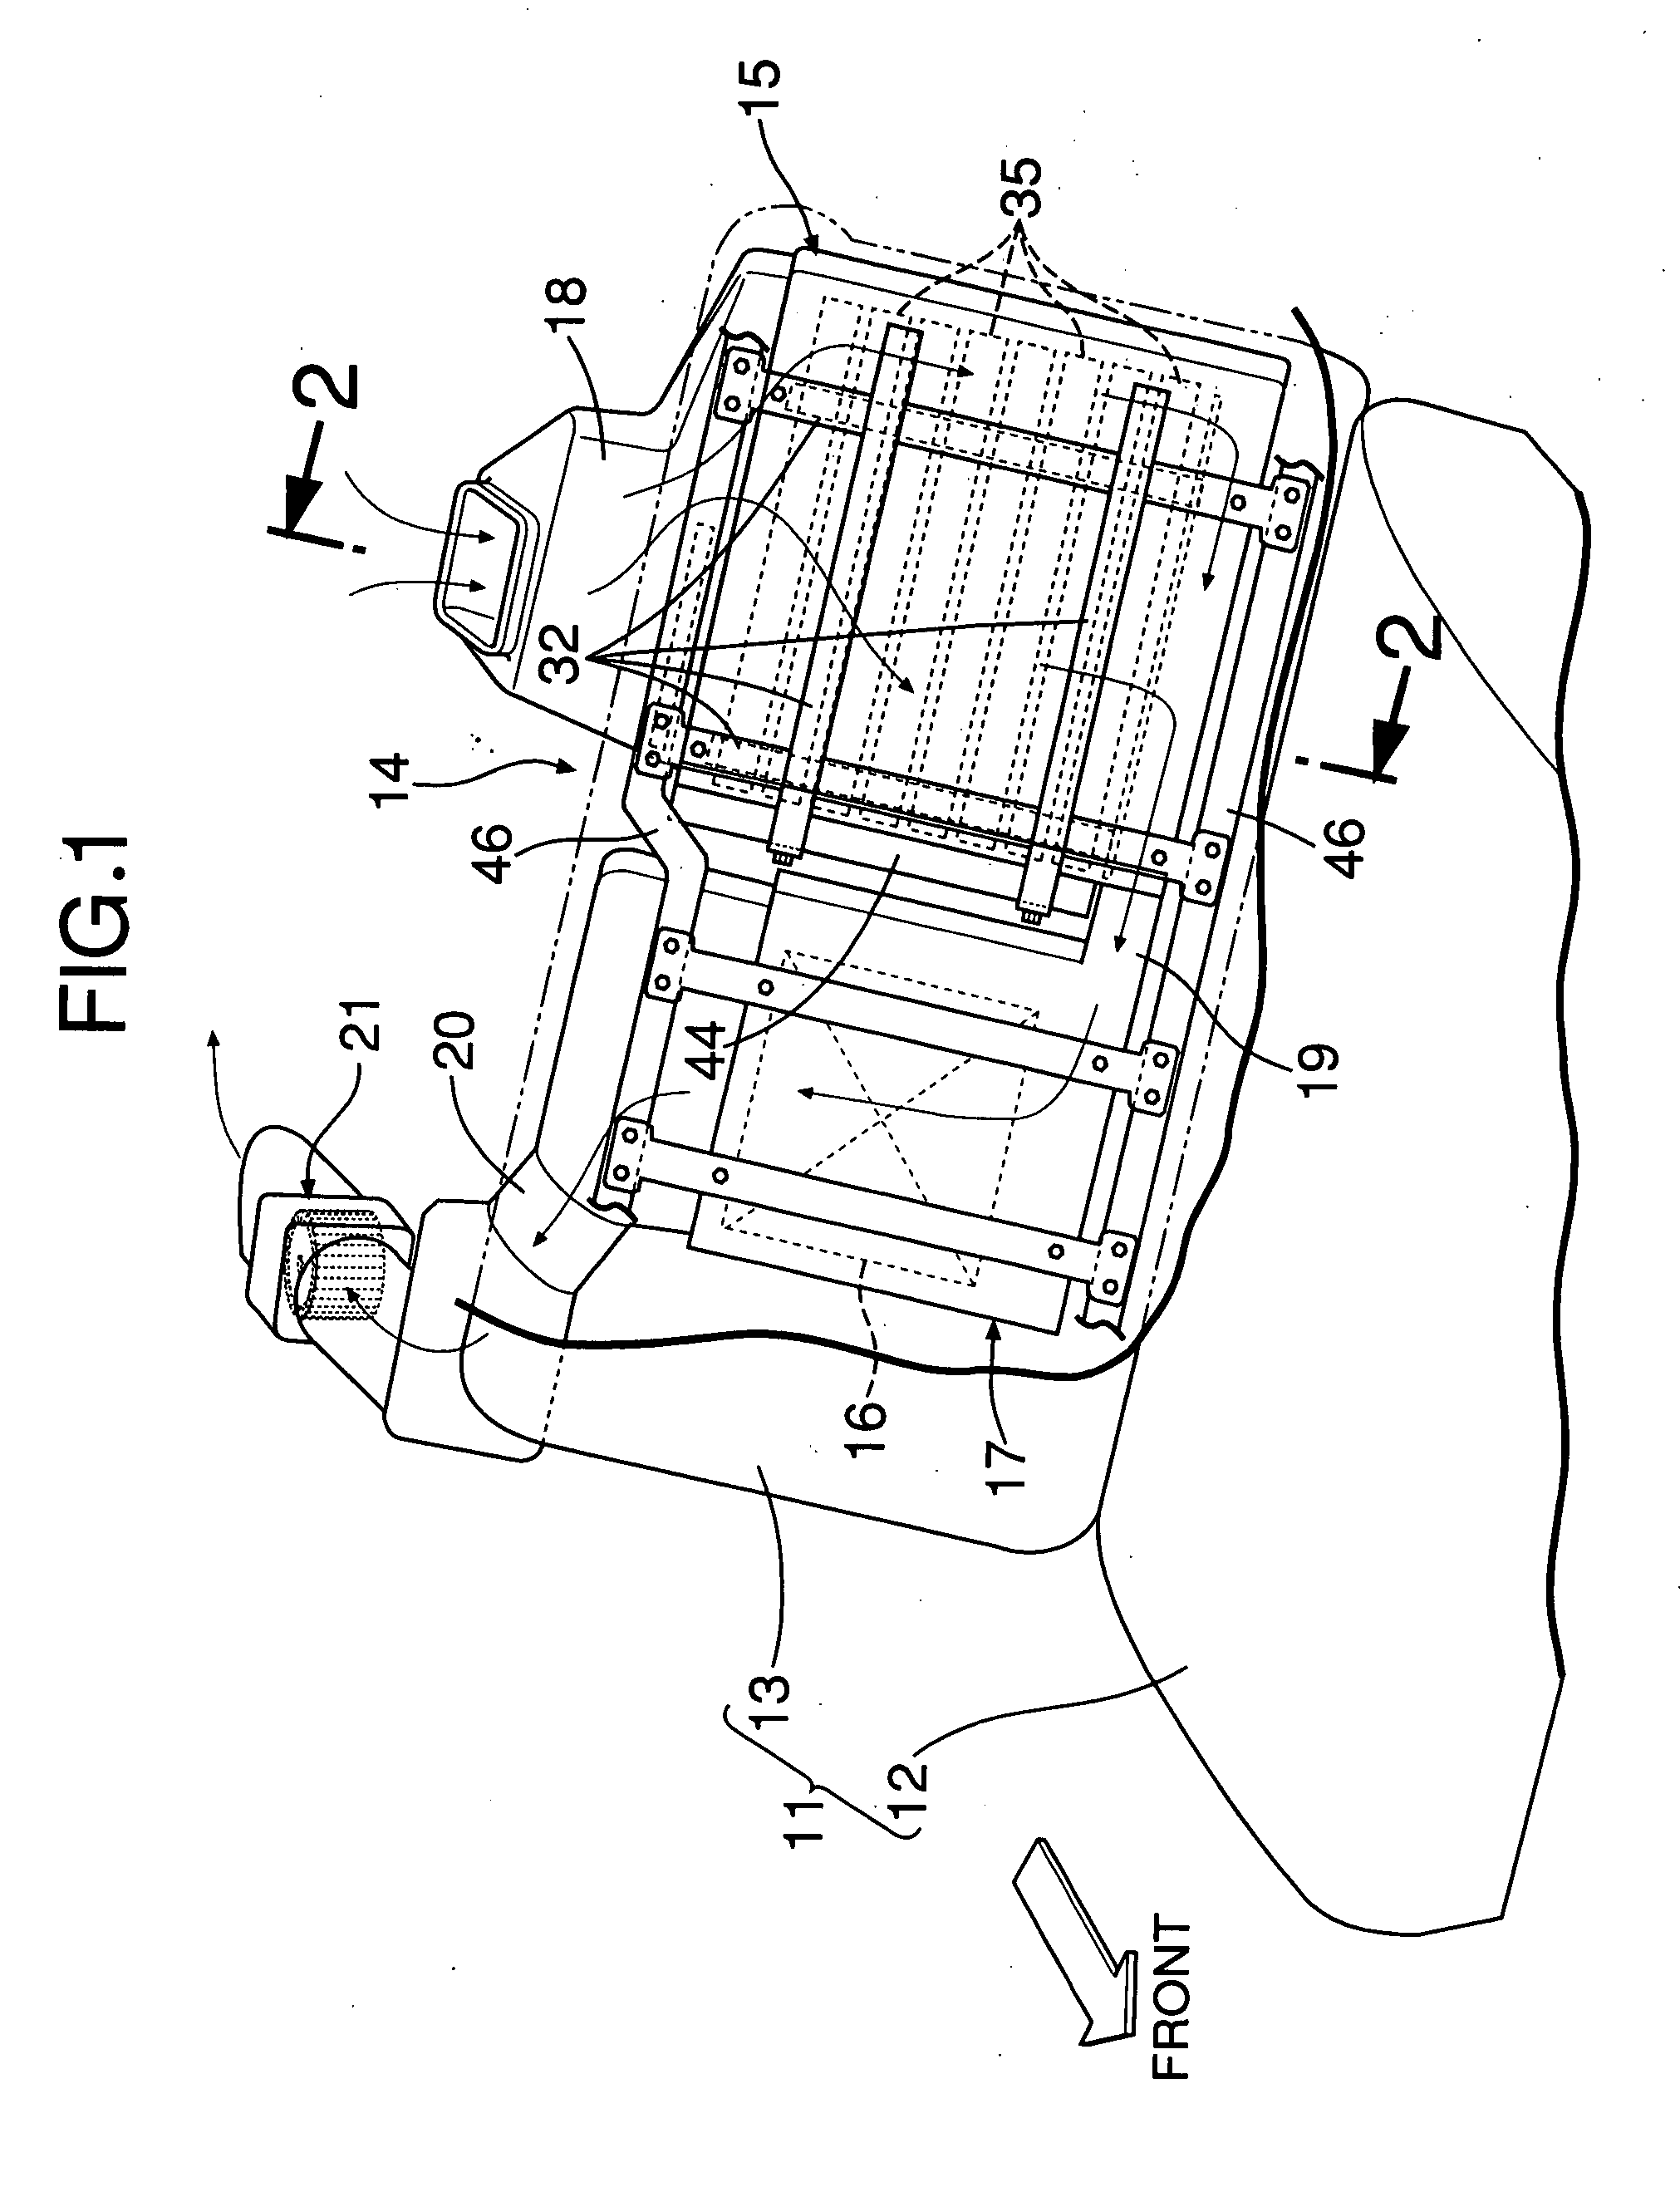 Vehicular power source device